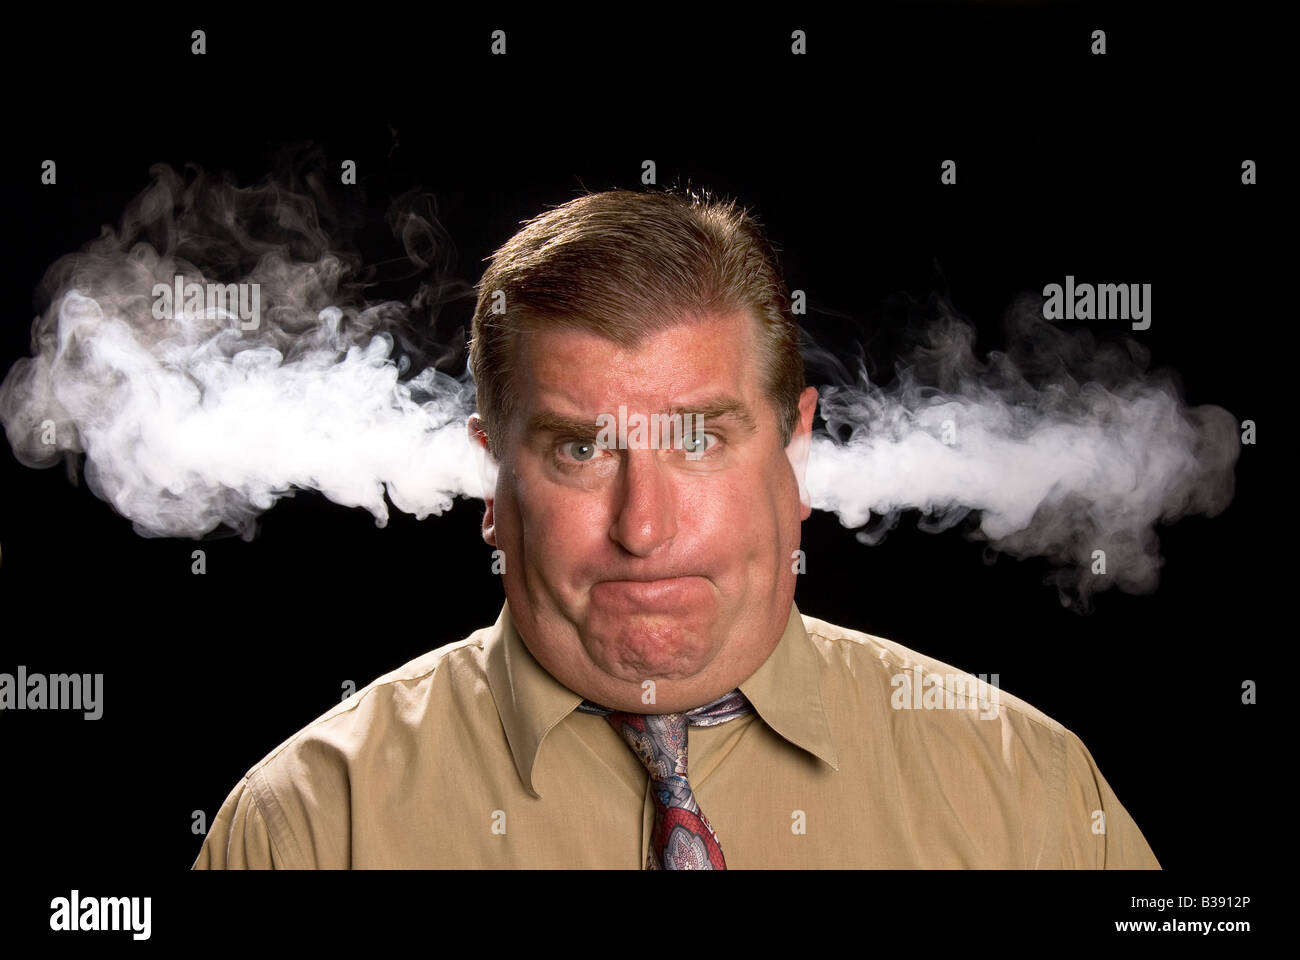 A man is angry and venting smoke from his ears in a classic expression shared in illustrations and cartoons Stock Photo